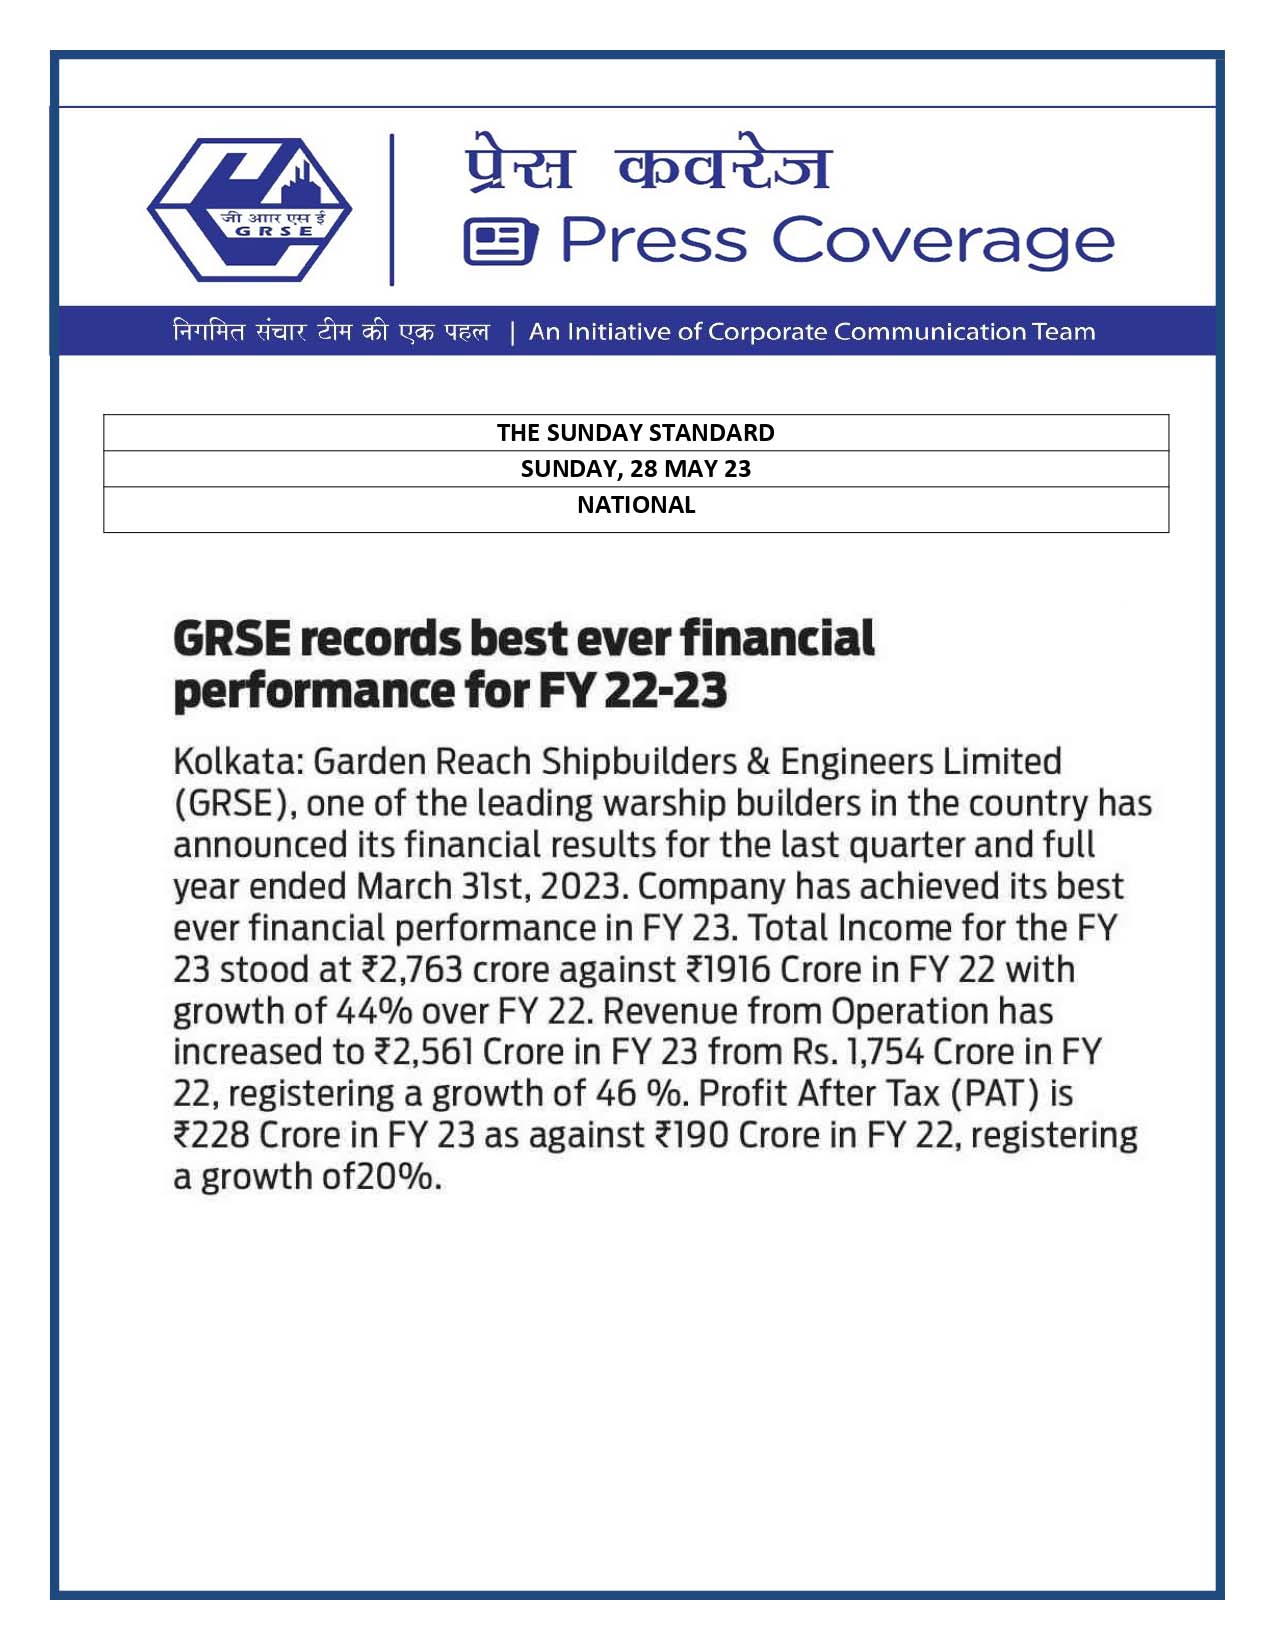 GRSE records best ever financial performance for FY 22-23